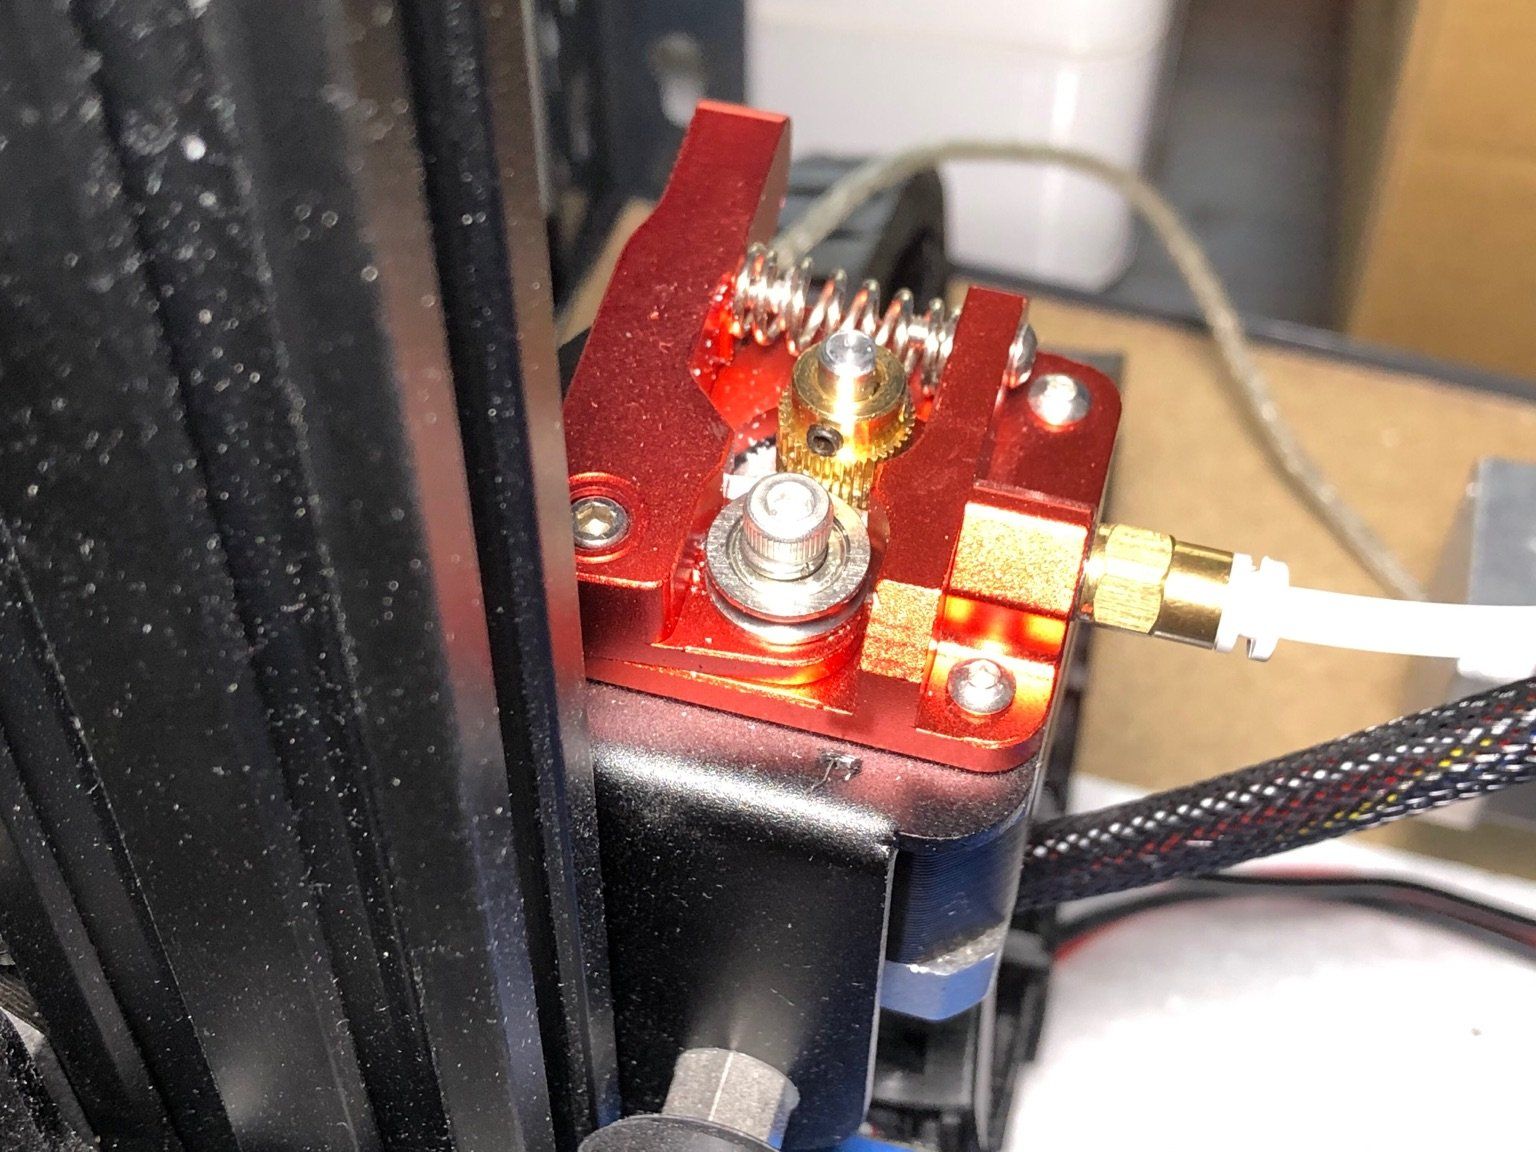 The extruder of the 3d printer. 